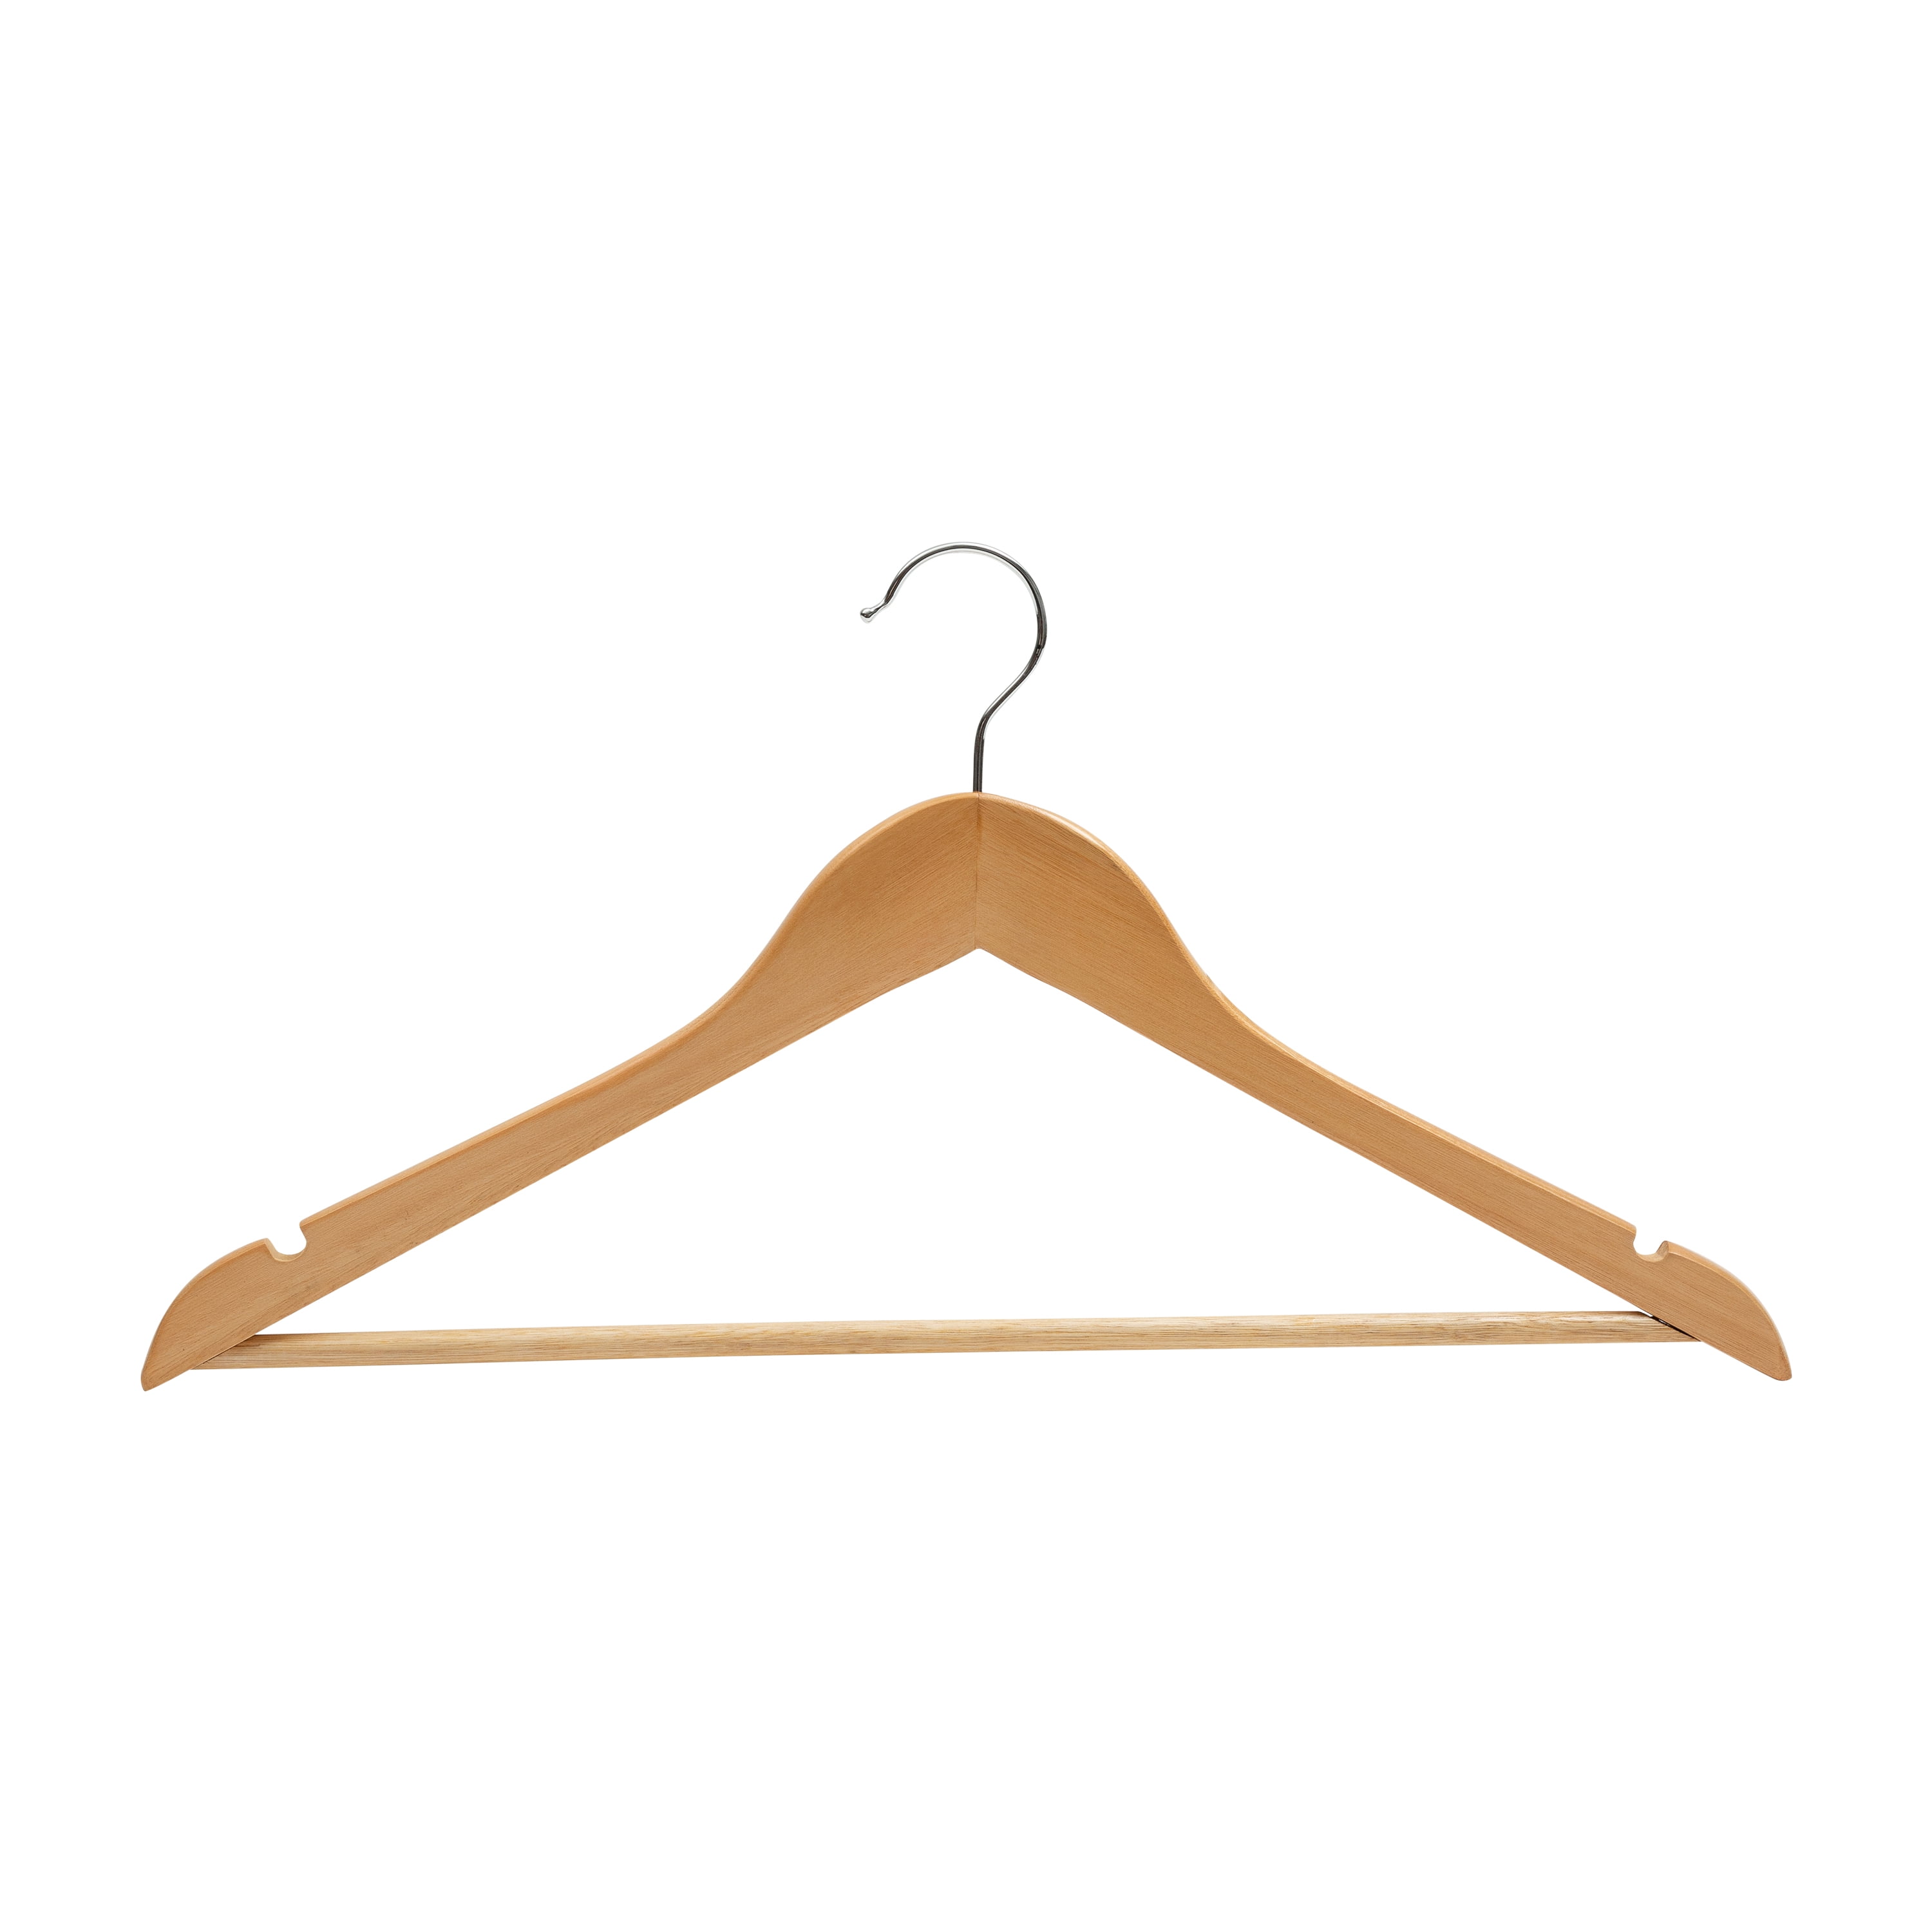 Details about   Whitmor GRADE A Natural Solid Wood Suit Hangers Chrome 360° Swivel Hook 16 Ct 